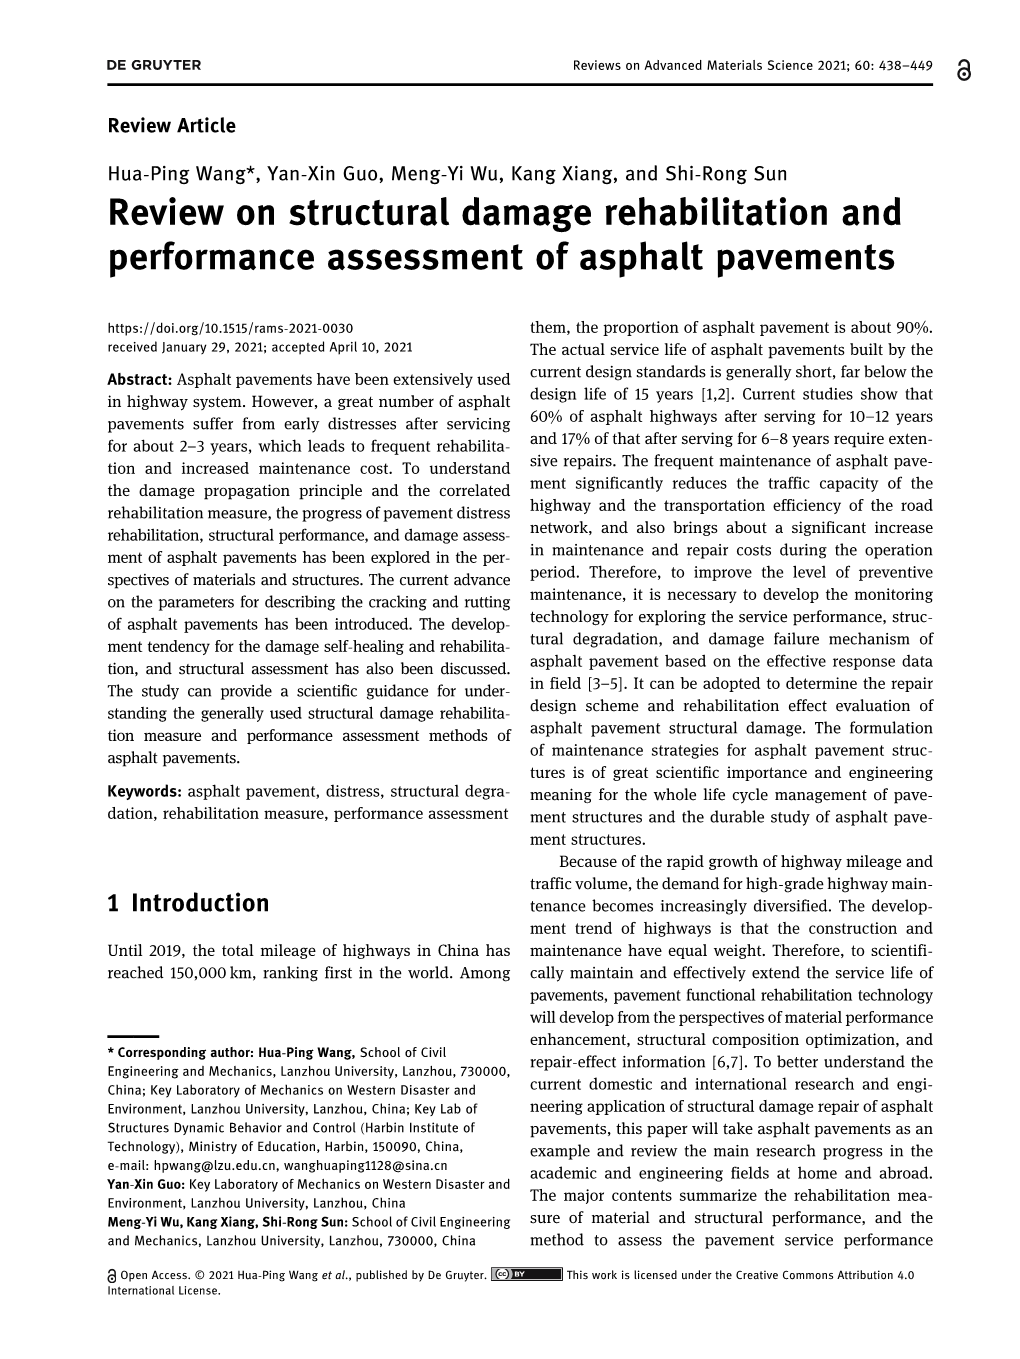 Review on Structural Damage Rehabilitation and Performance Assessment of Asphalt Pavements